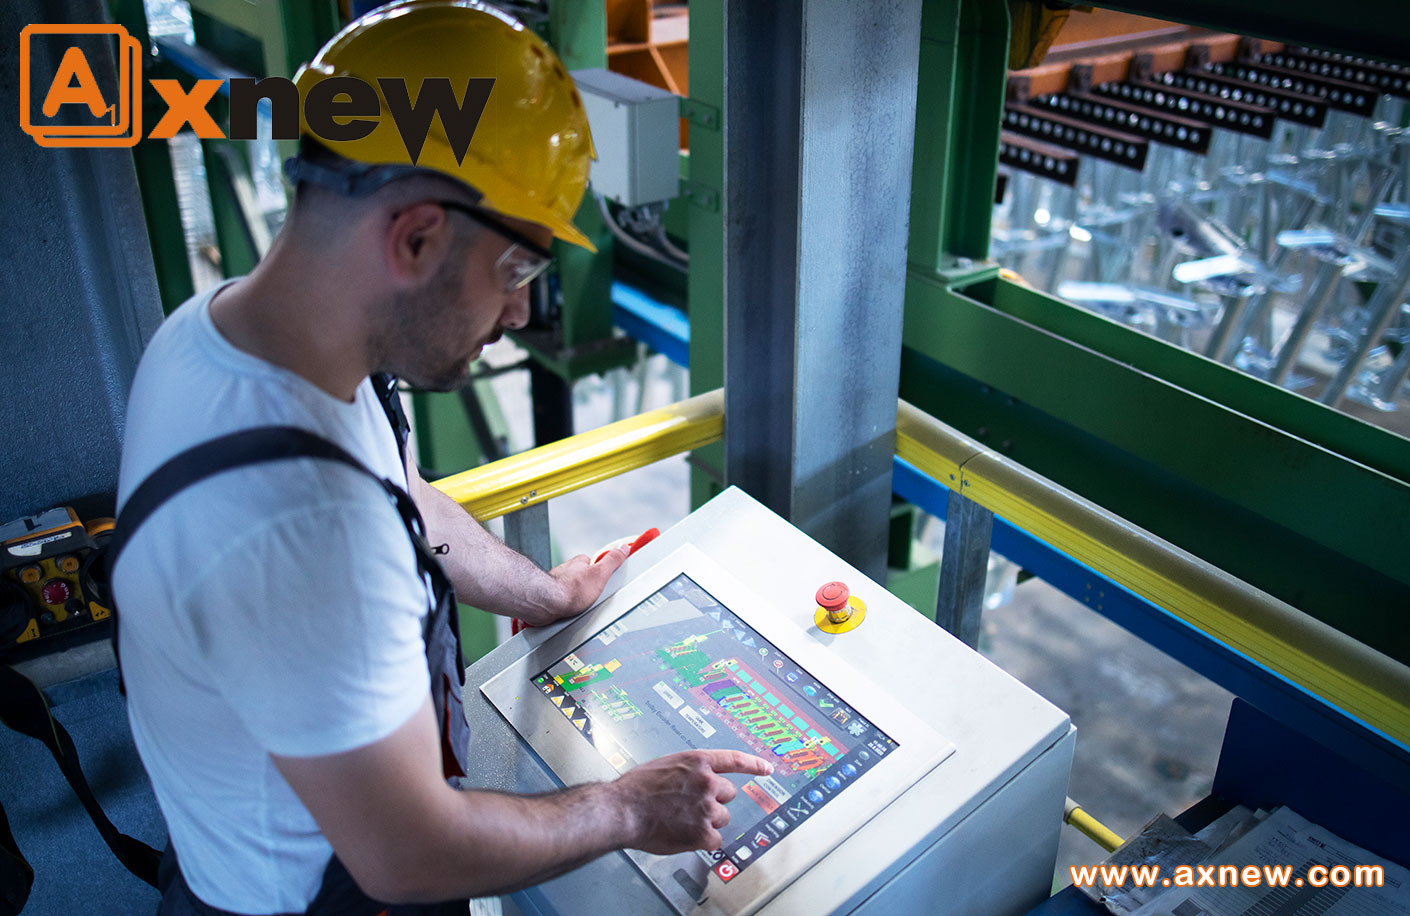 Embedded industrial touch display